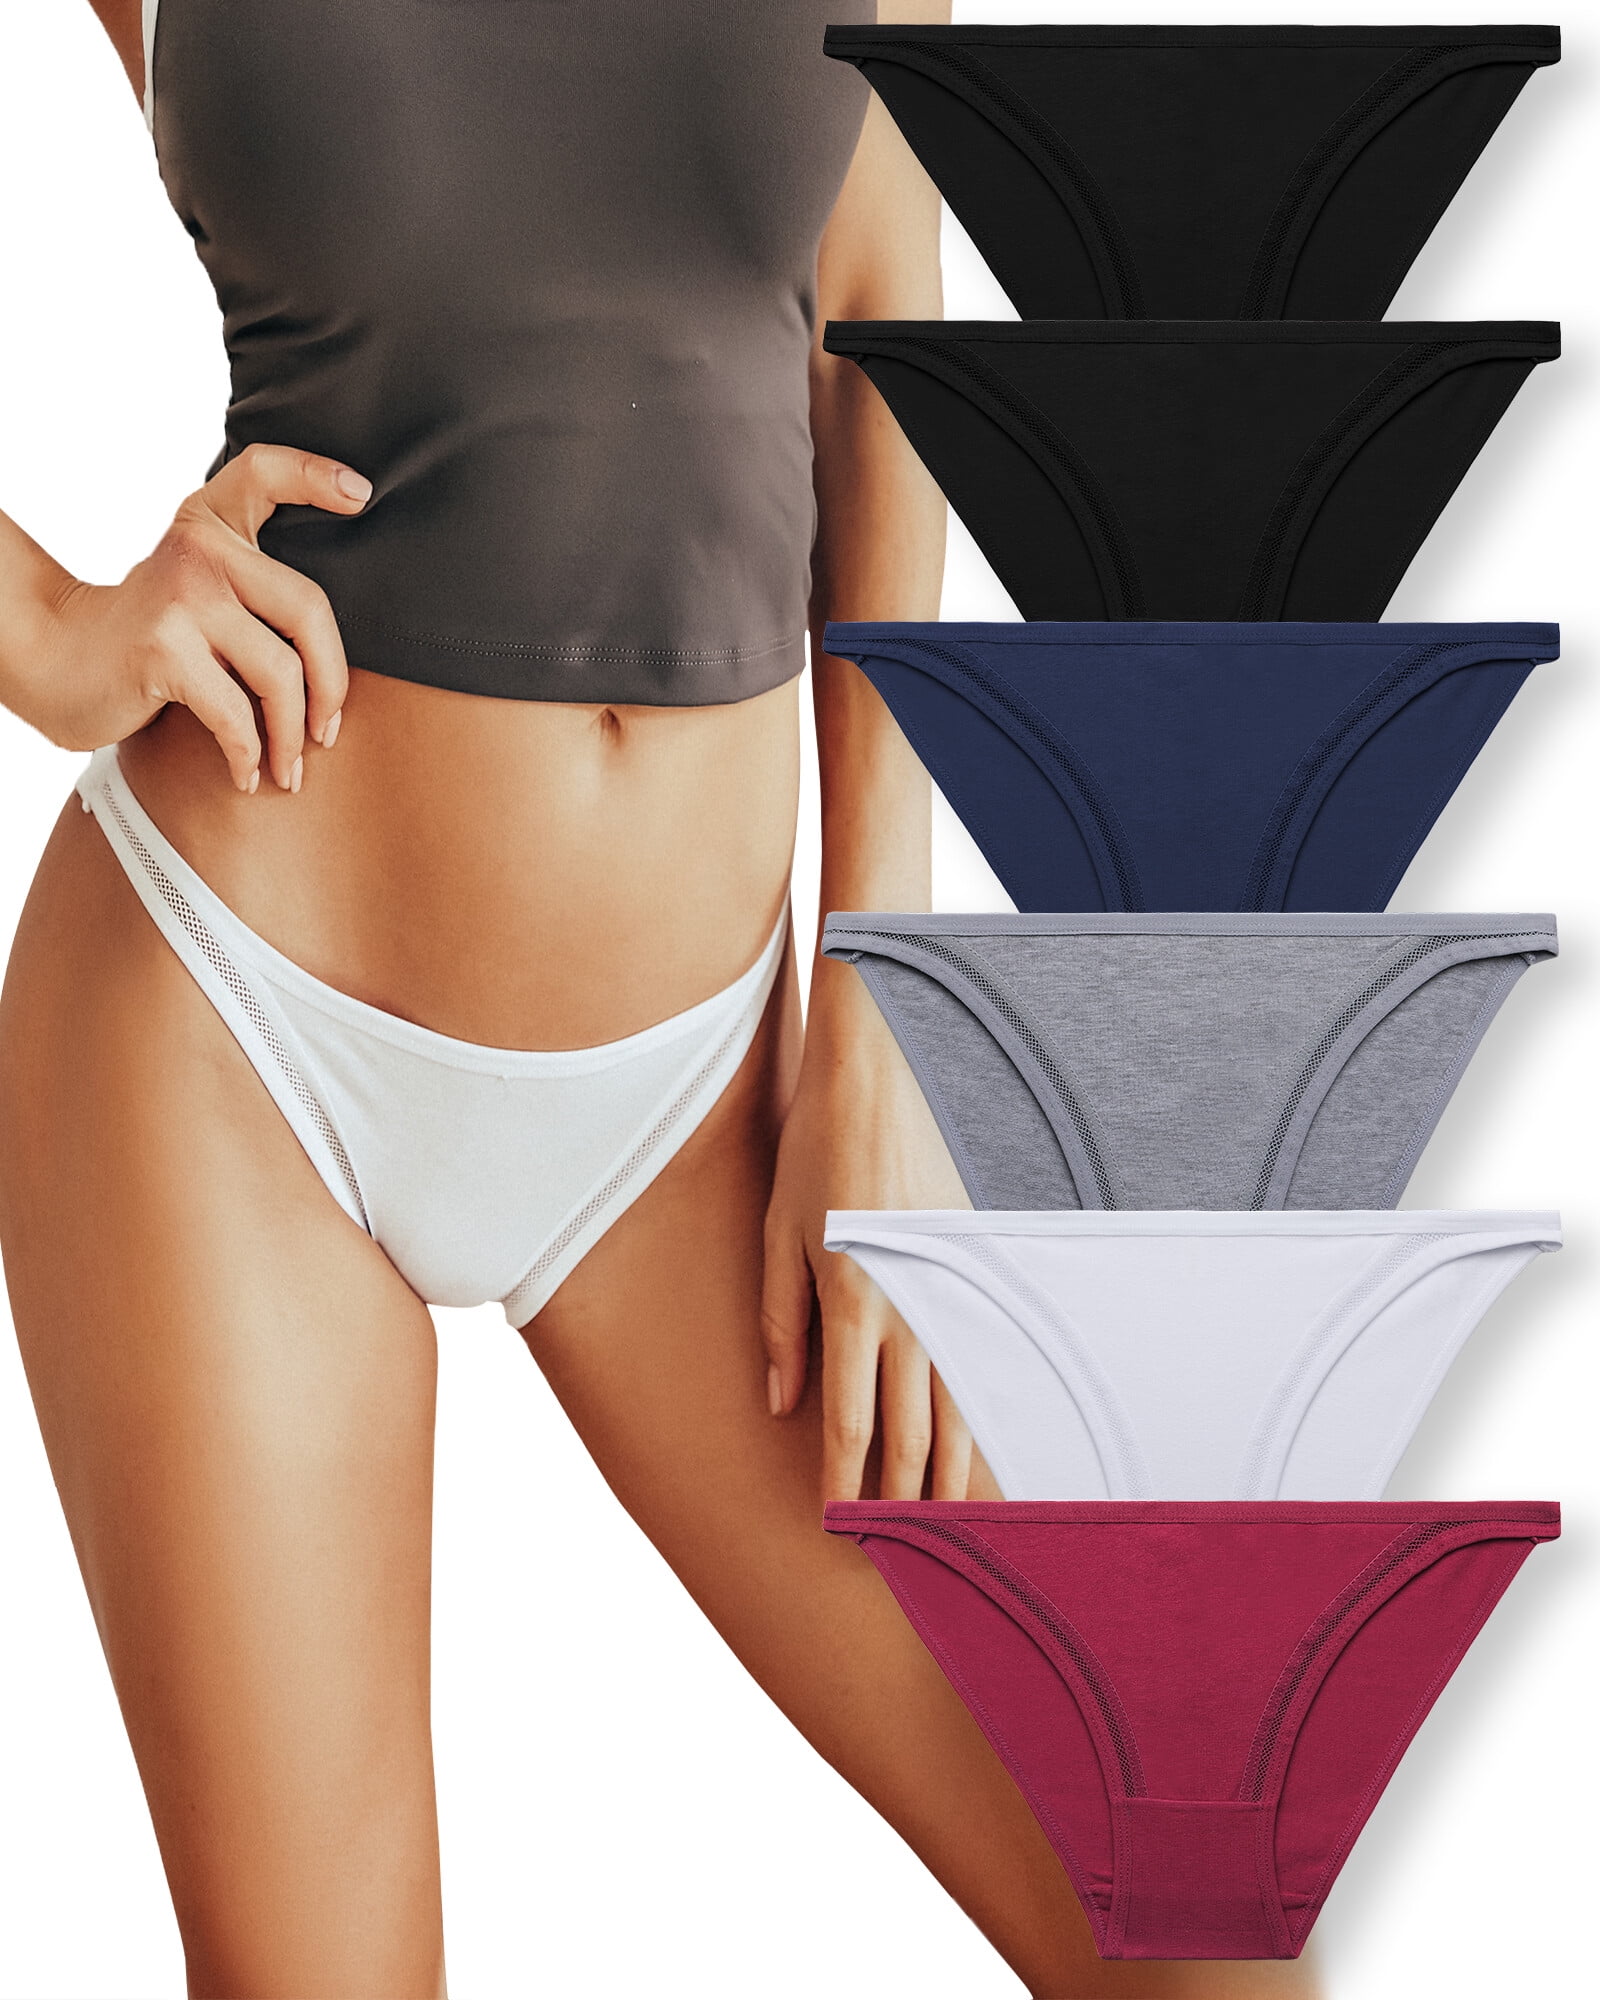 Seamless Underwear For Women No Show Panties For Women Breathable Stretch Bikini Panties Soft Cheeky Hipster Panty 5 Pack 